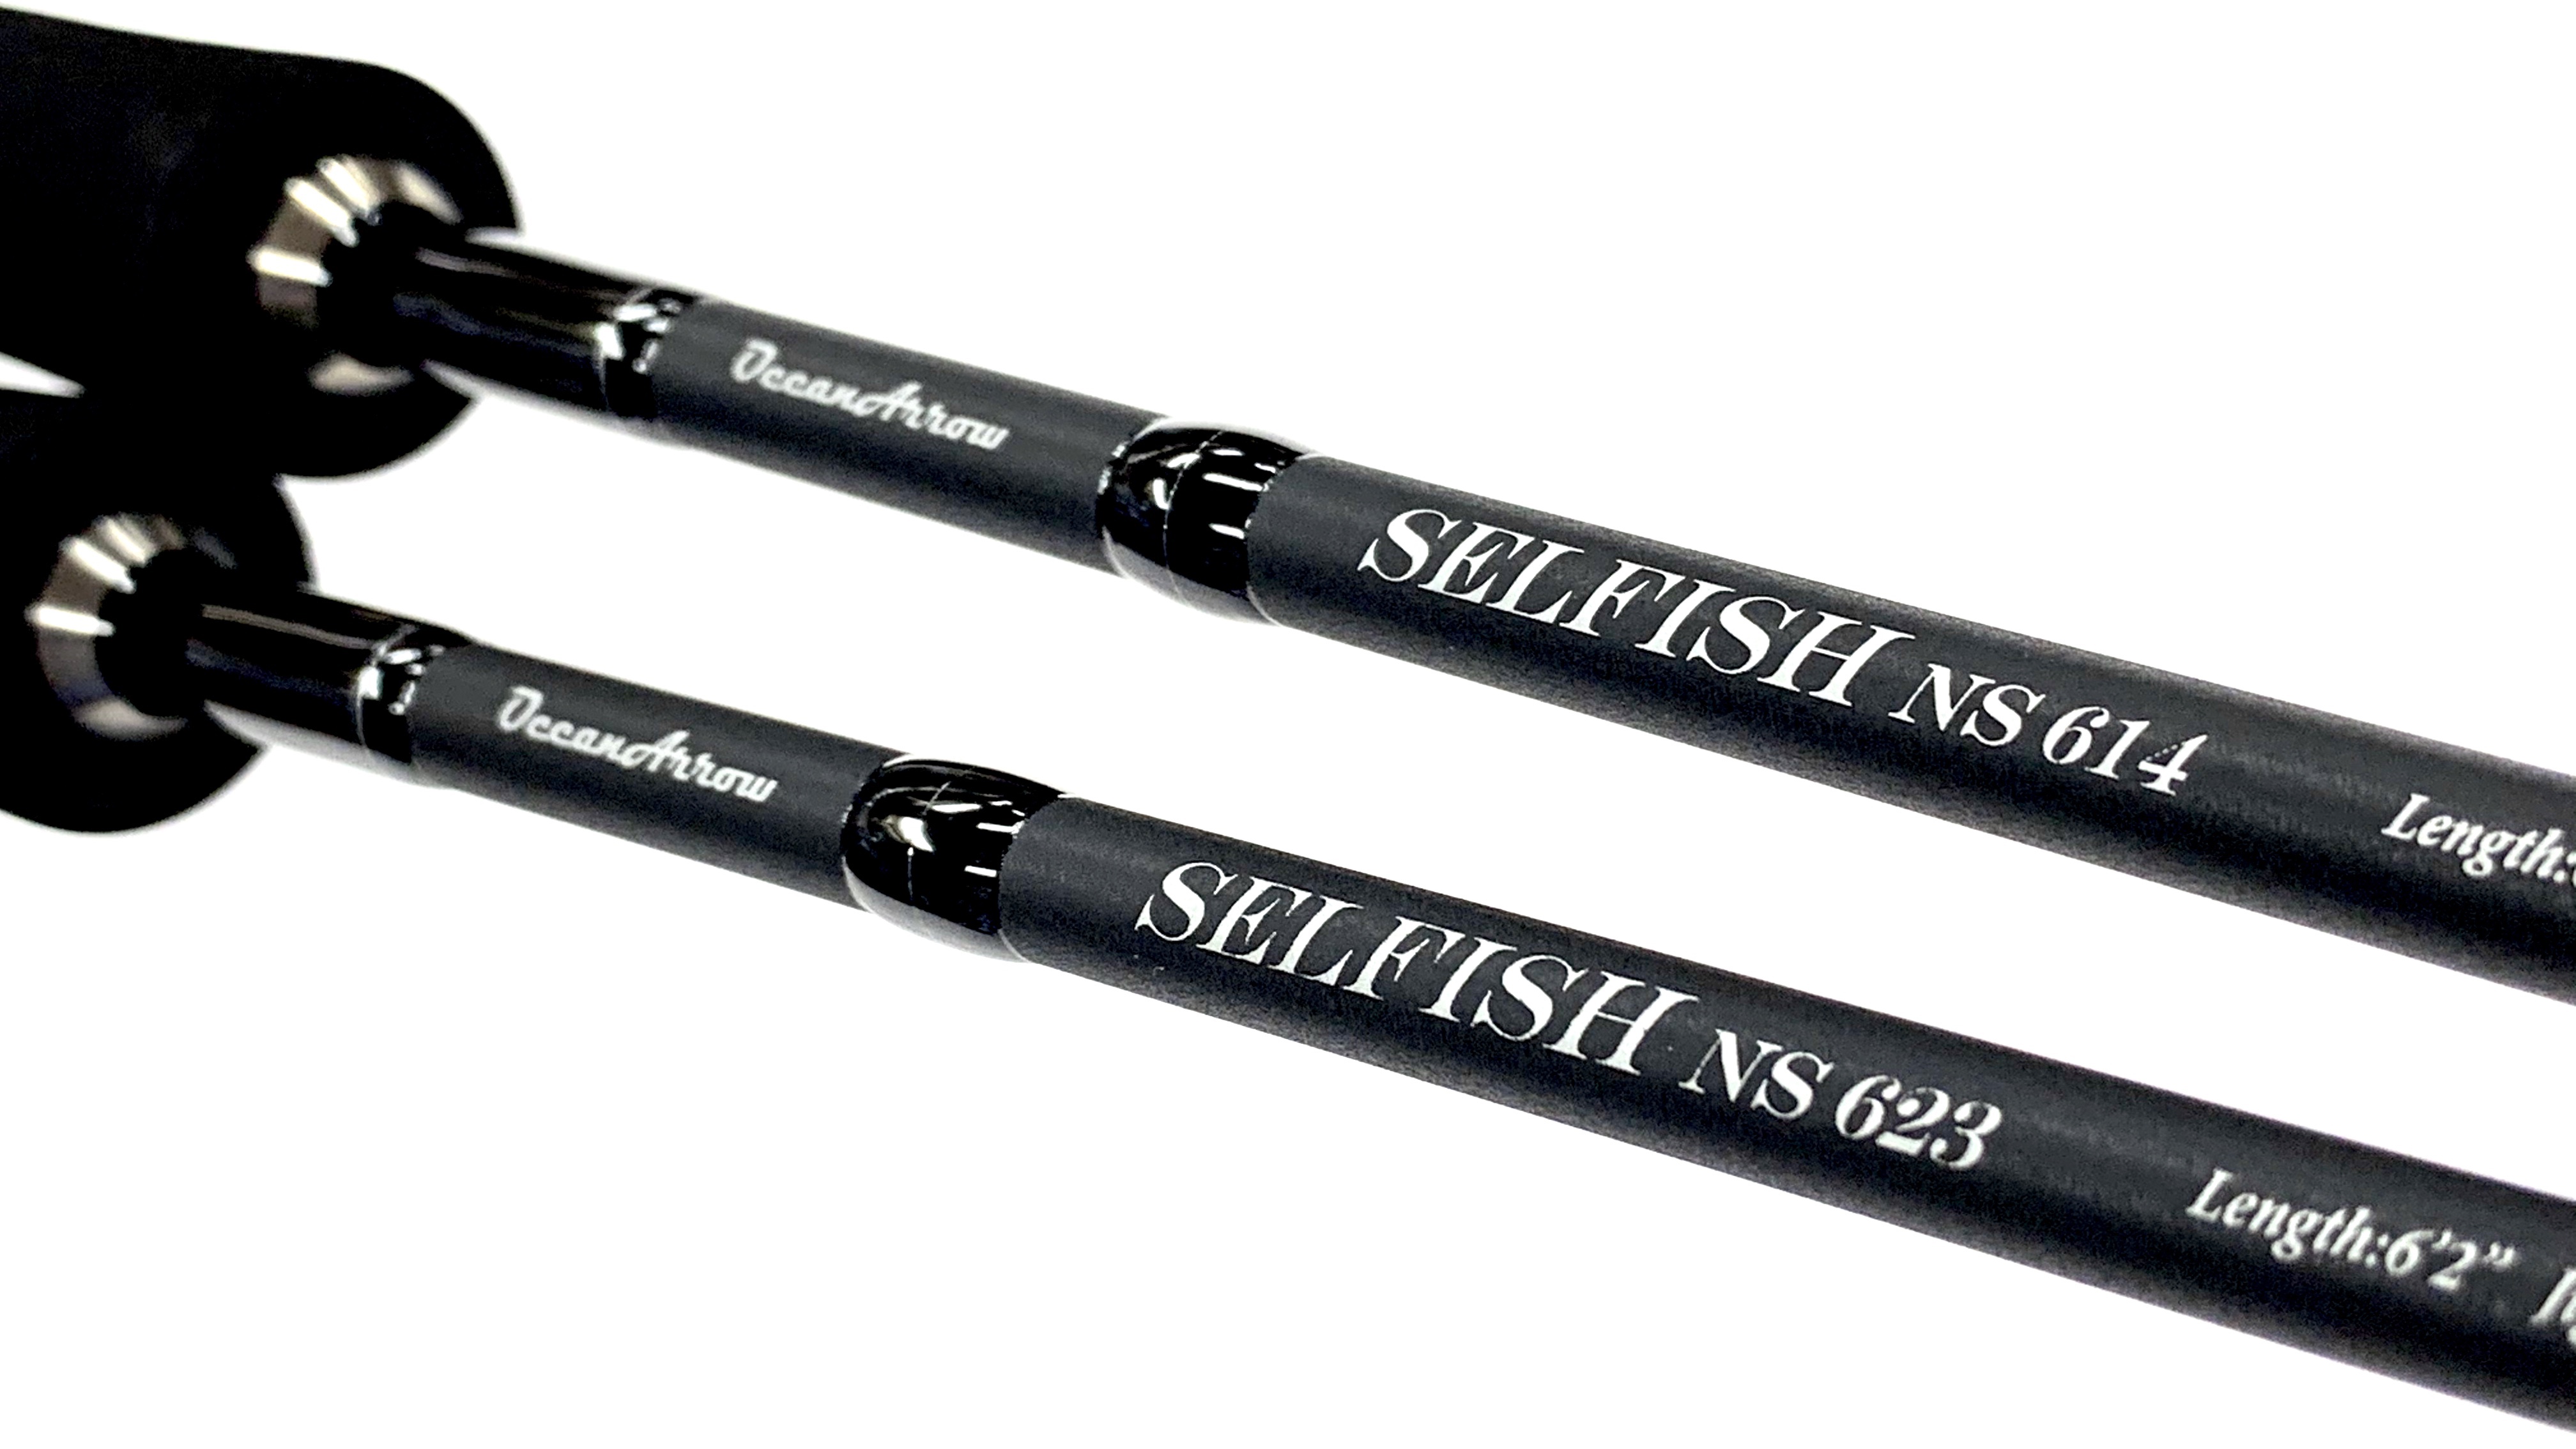 2020 NEW PRODUCT Ripple Fisher 【SELFISH NS 623 / 614